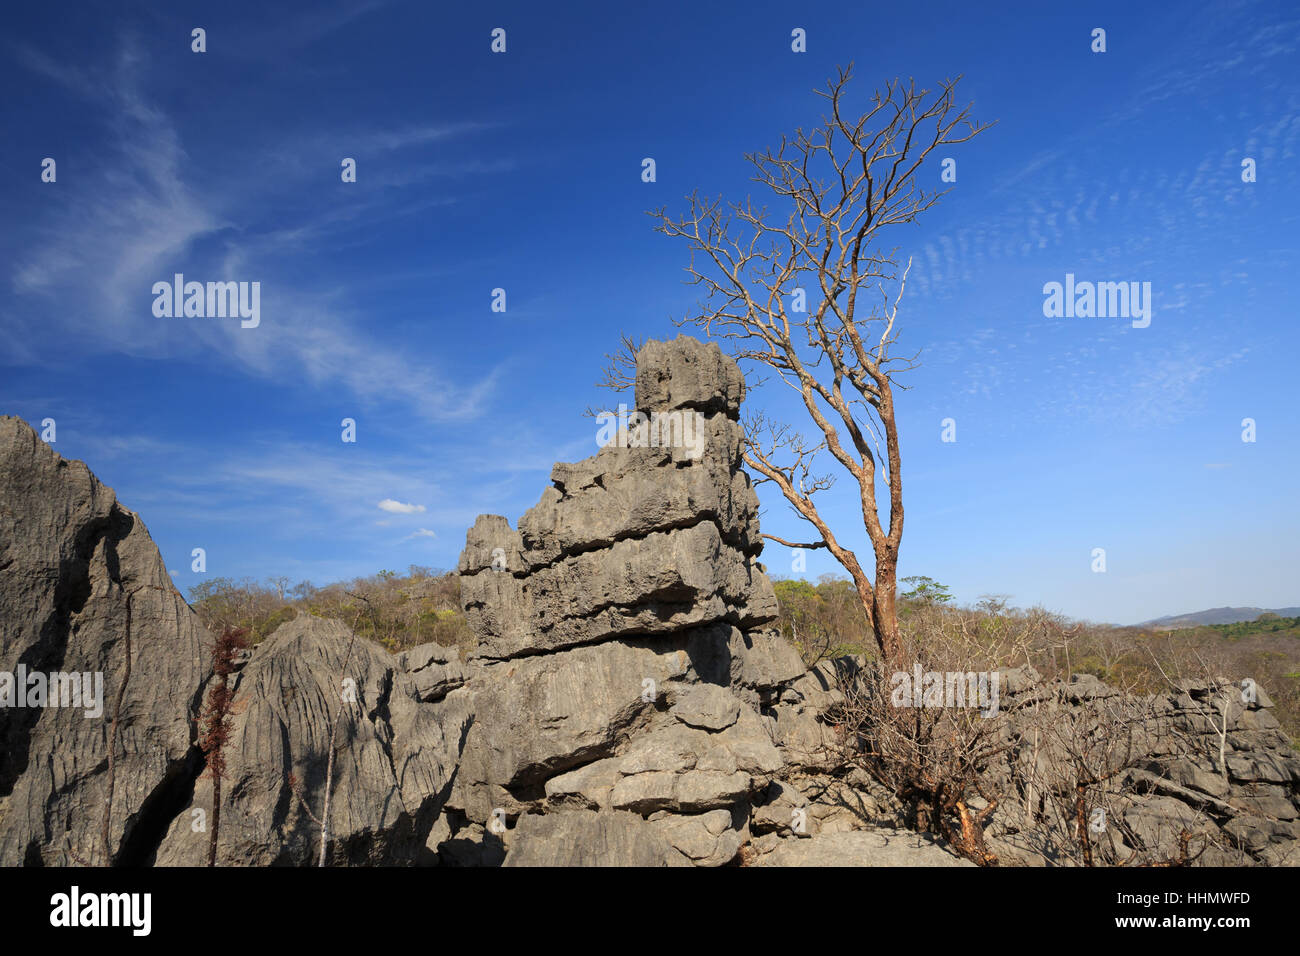 Curiously strange rock formations of fantastically eroded limestone spires, known as Tsingy in amazing National Park Ankarana, Madagascar wilderness Stock Photo